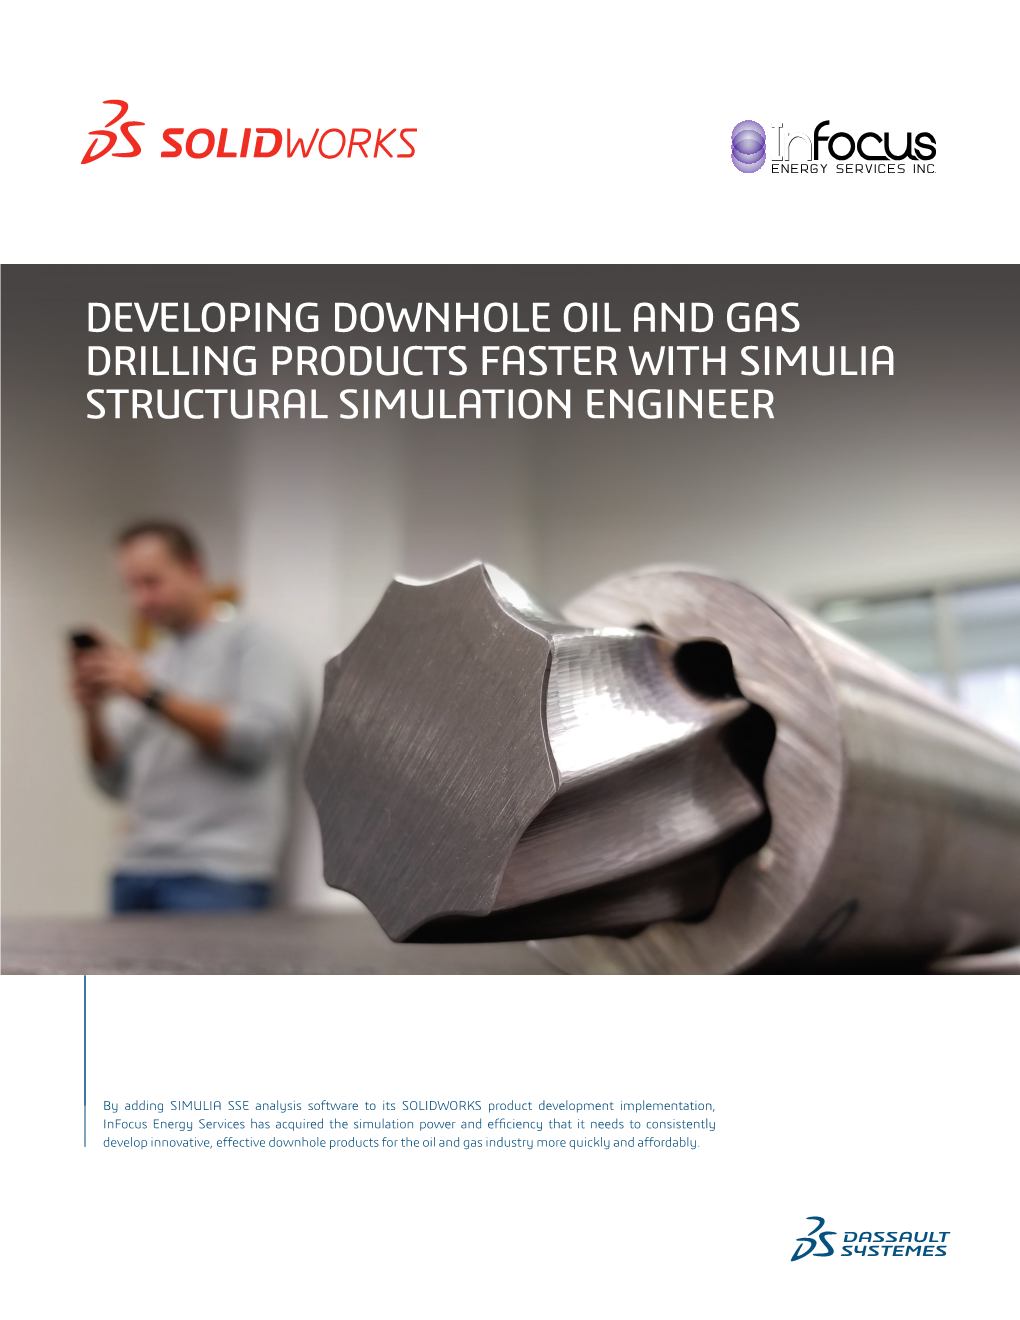 Developing Downhole Oil and Gas Drilling Products Faster with Simulia Structural Simulation Engineer